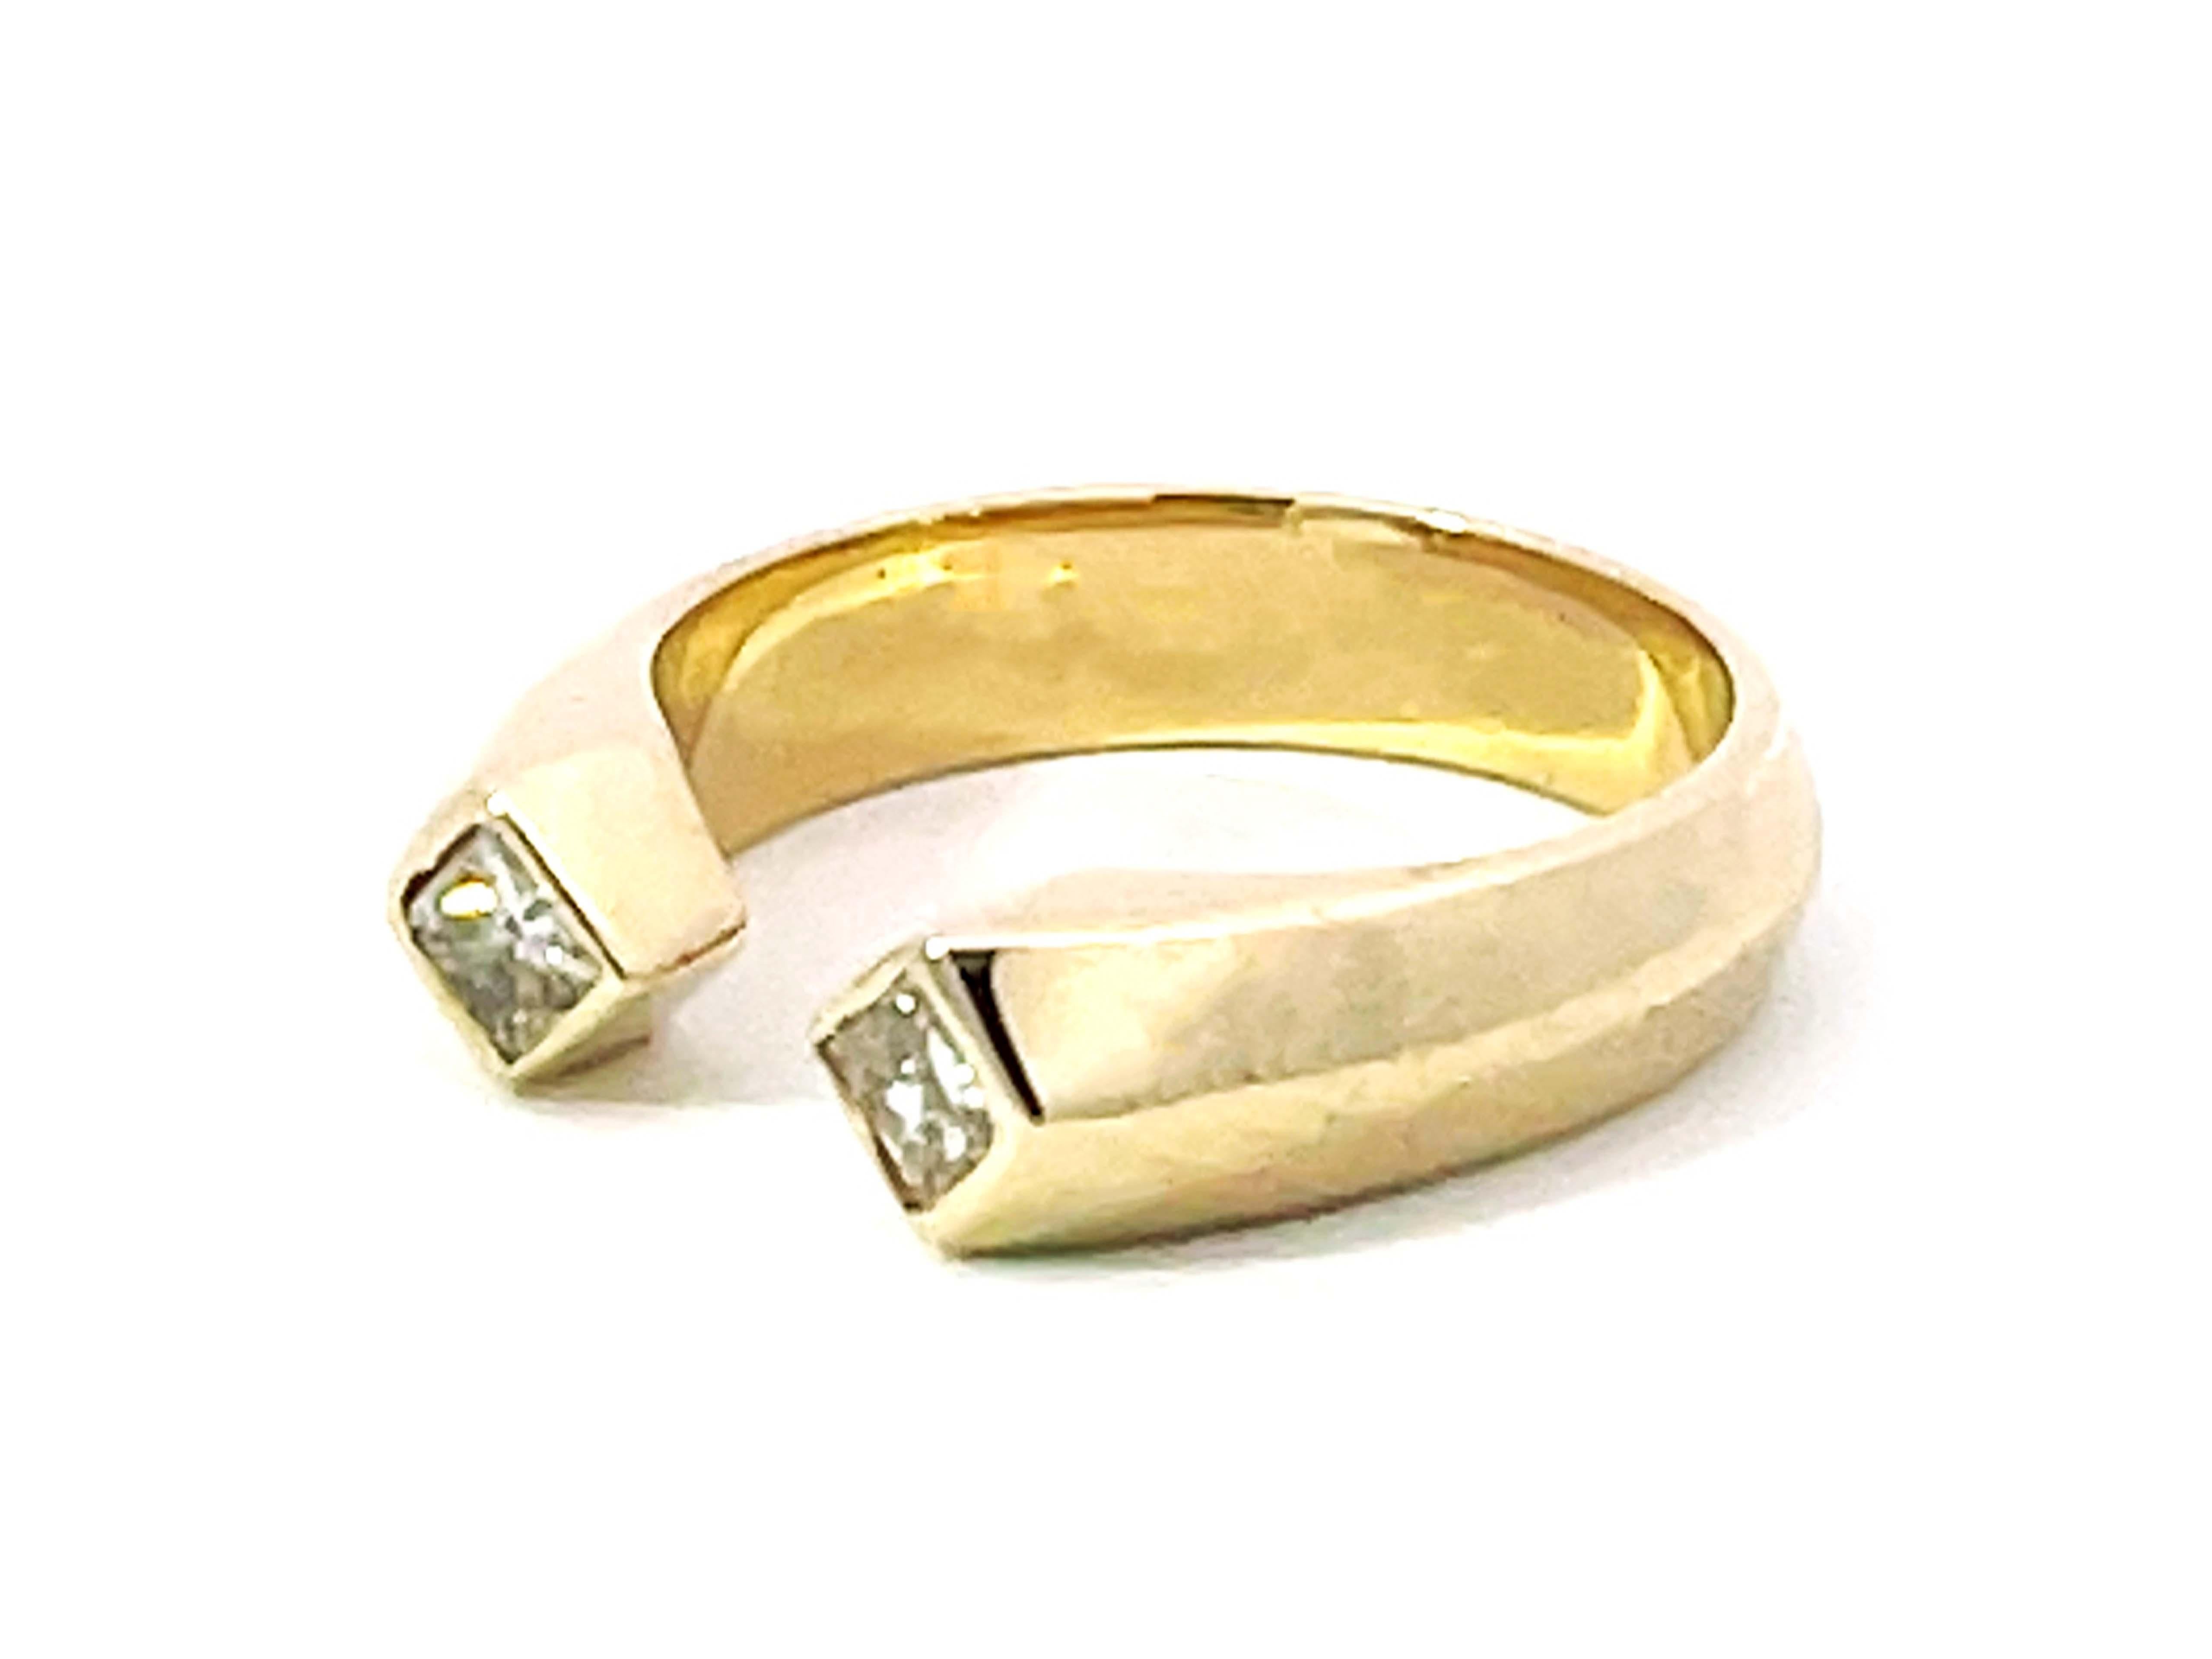 2 Princess Cut Diamond Open Band Ring Solid 14K Yellow Gold In Excellent Condition For Sale In Honolulu, HI